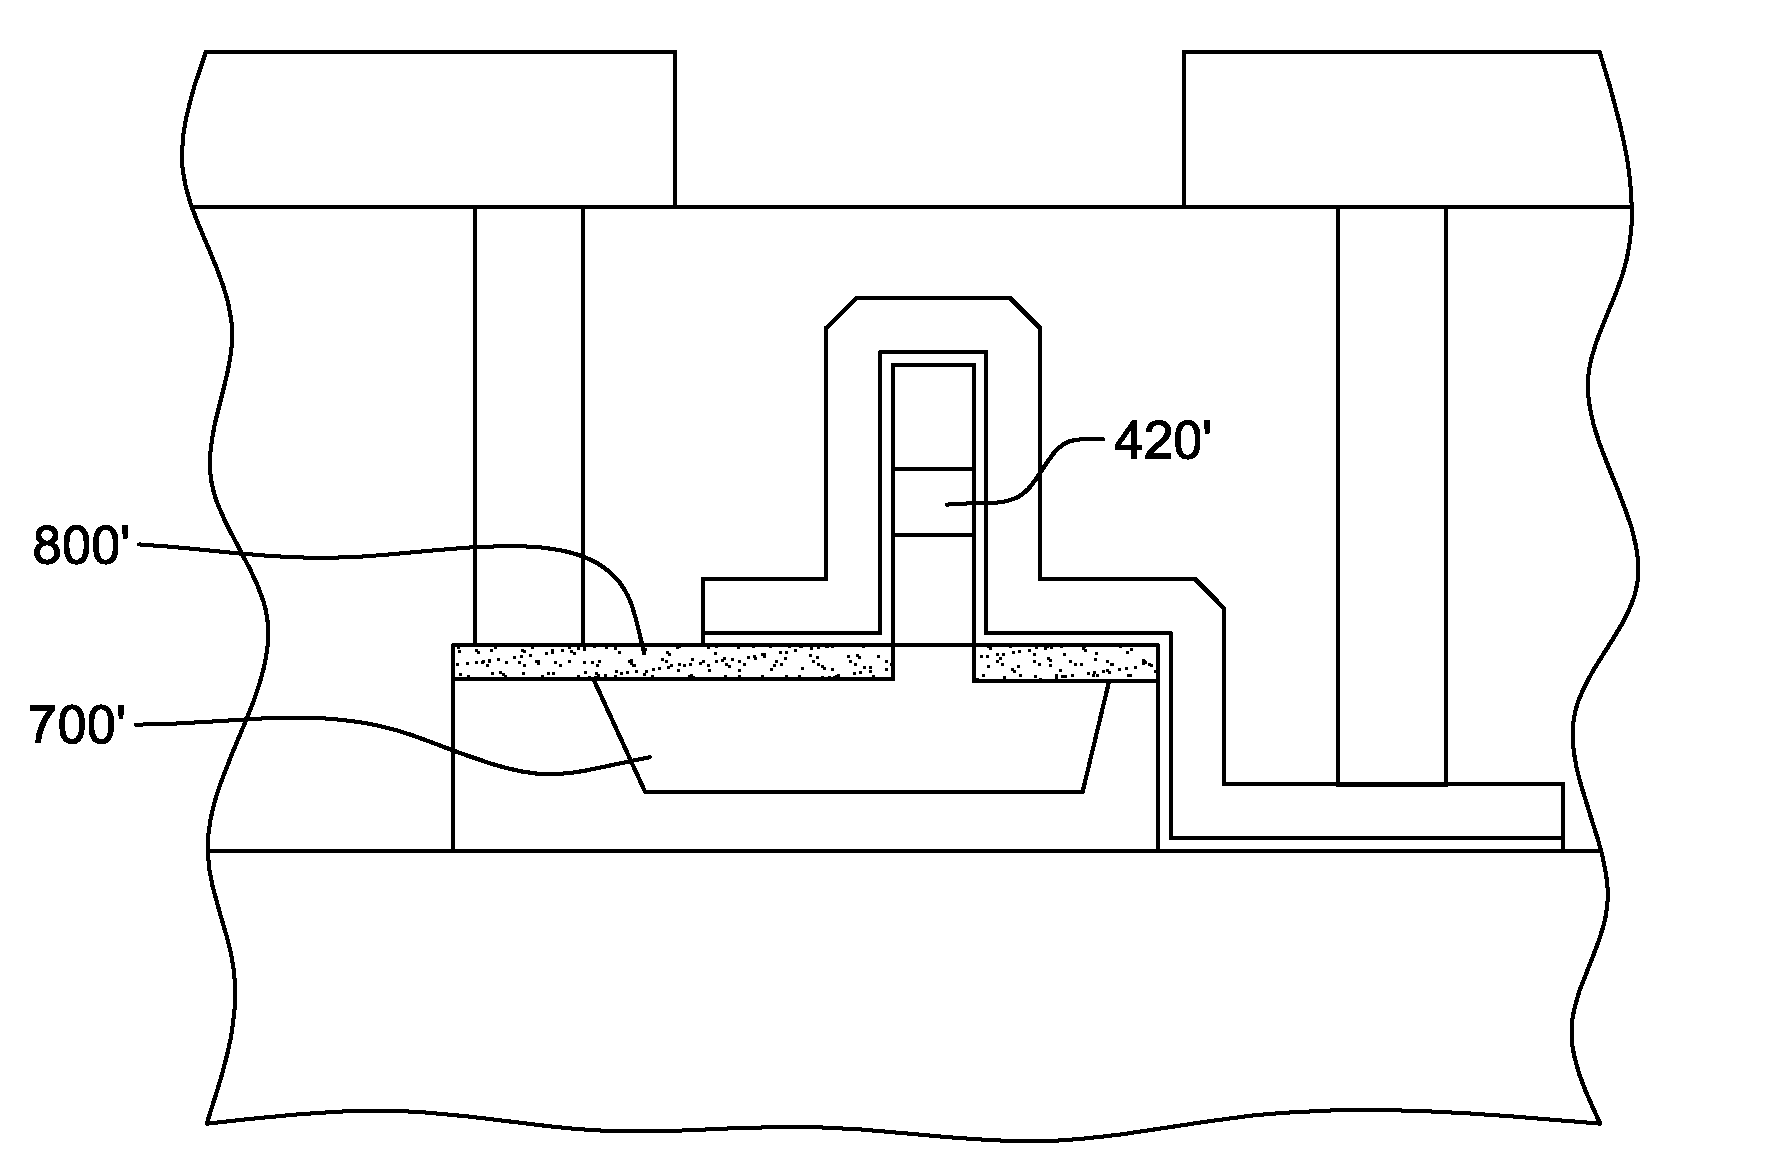 Gated circuit structure with self-aligned tunneling region